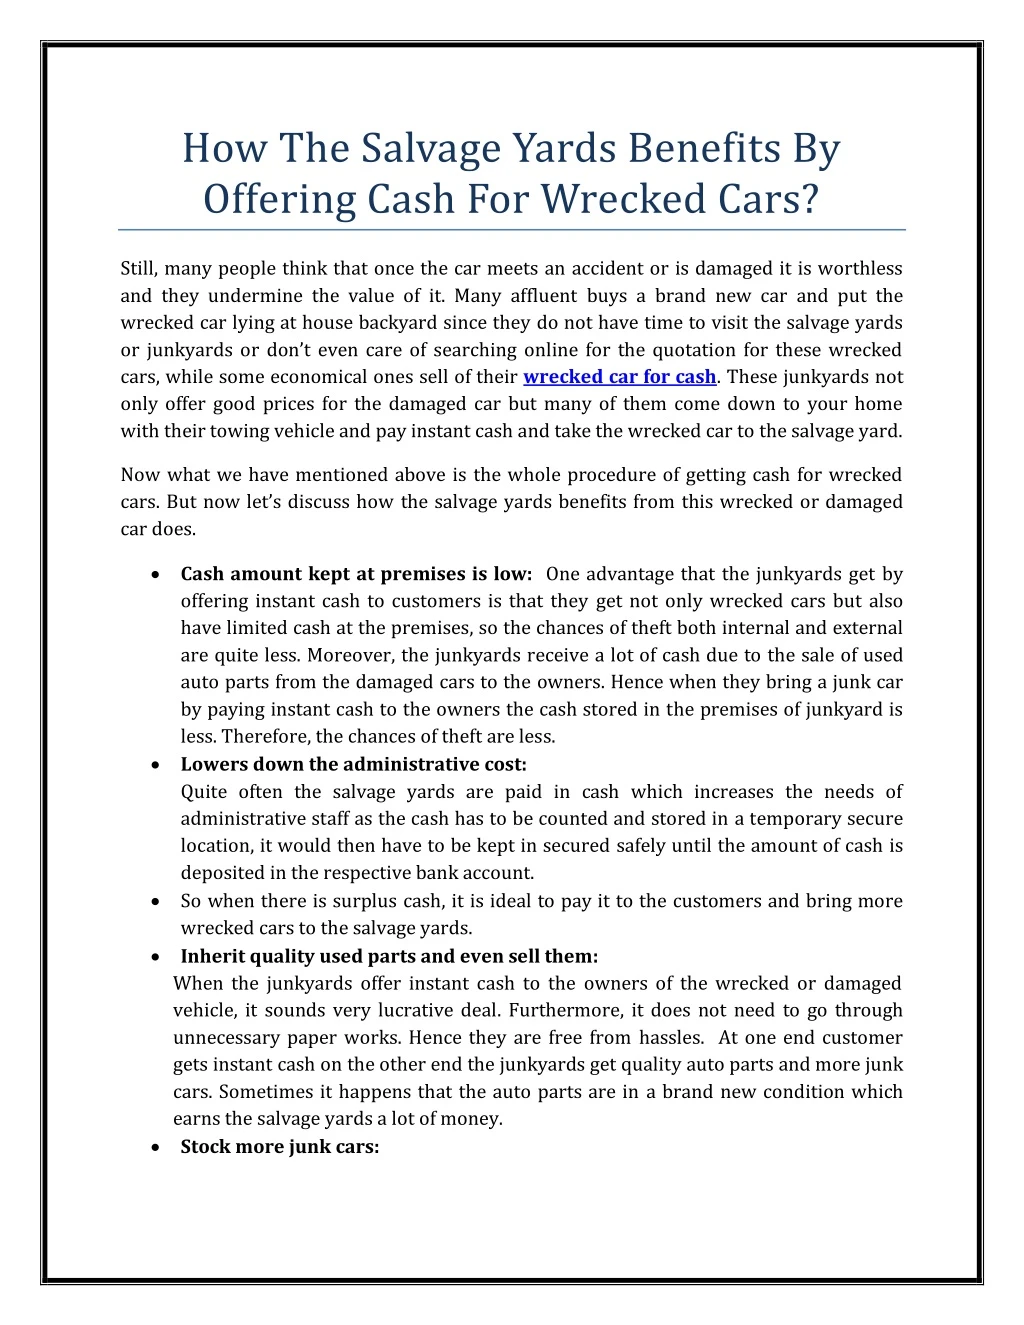 how the salvage yards benefits by offering cash